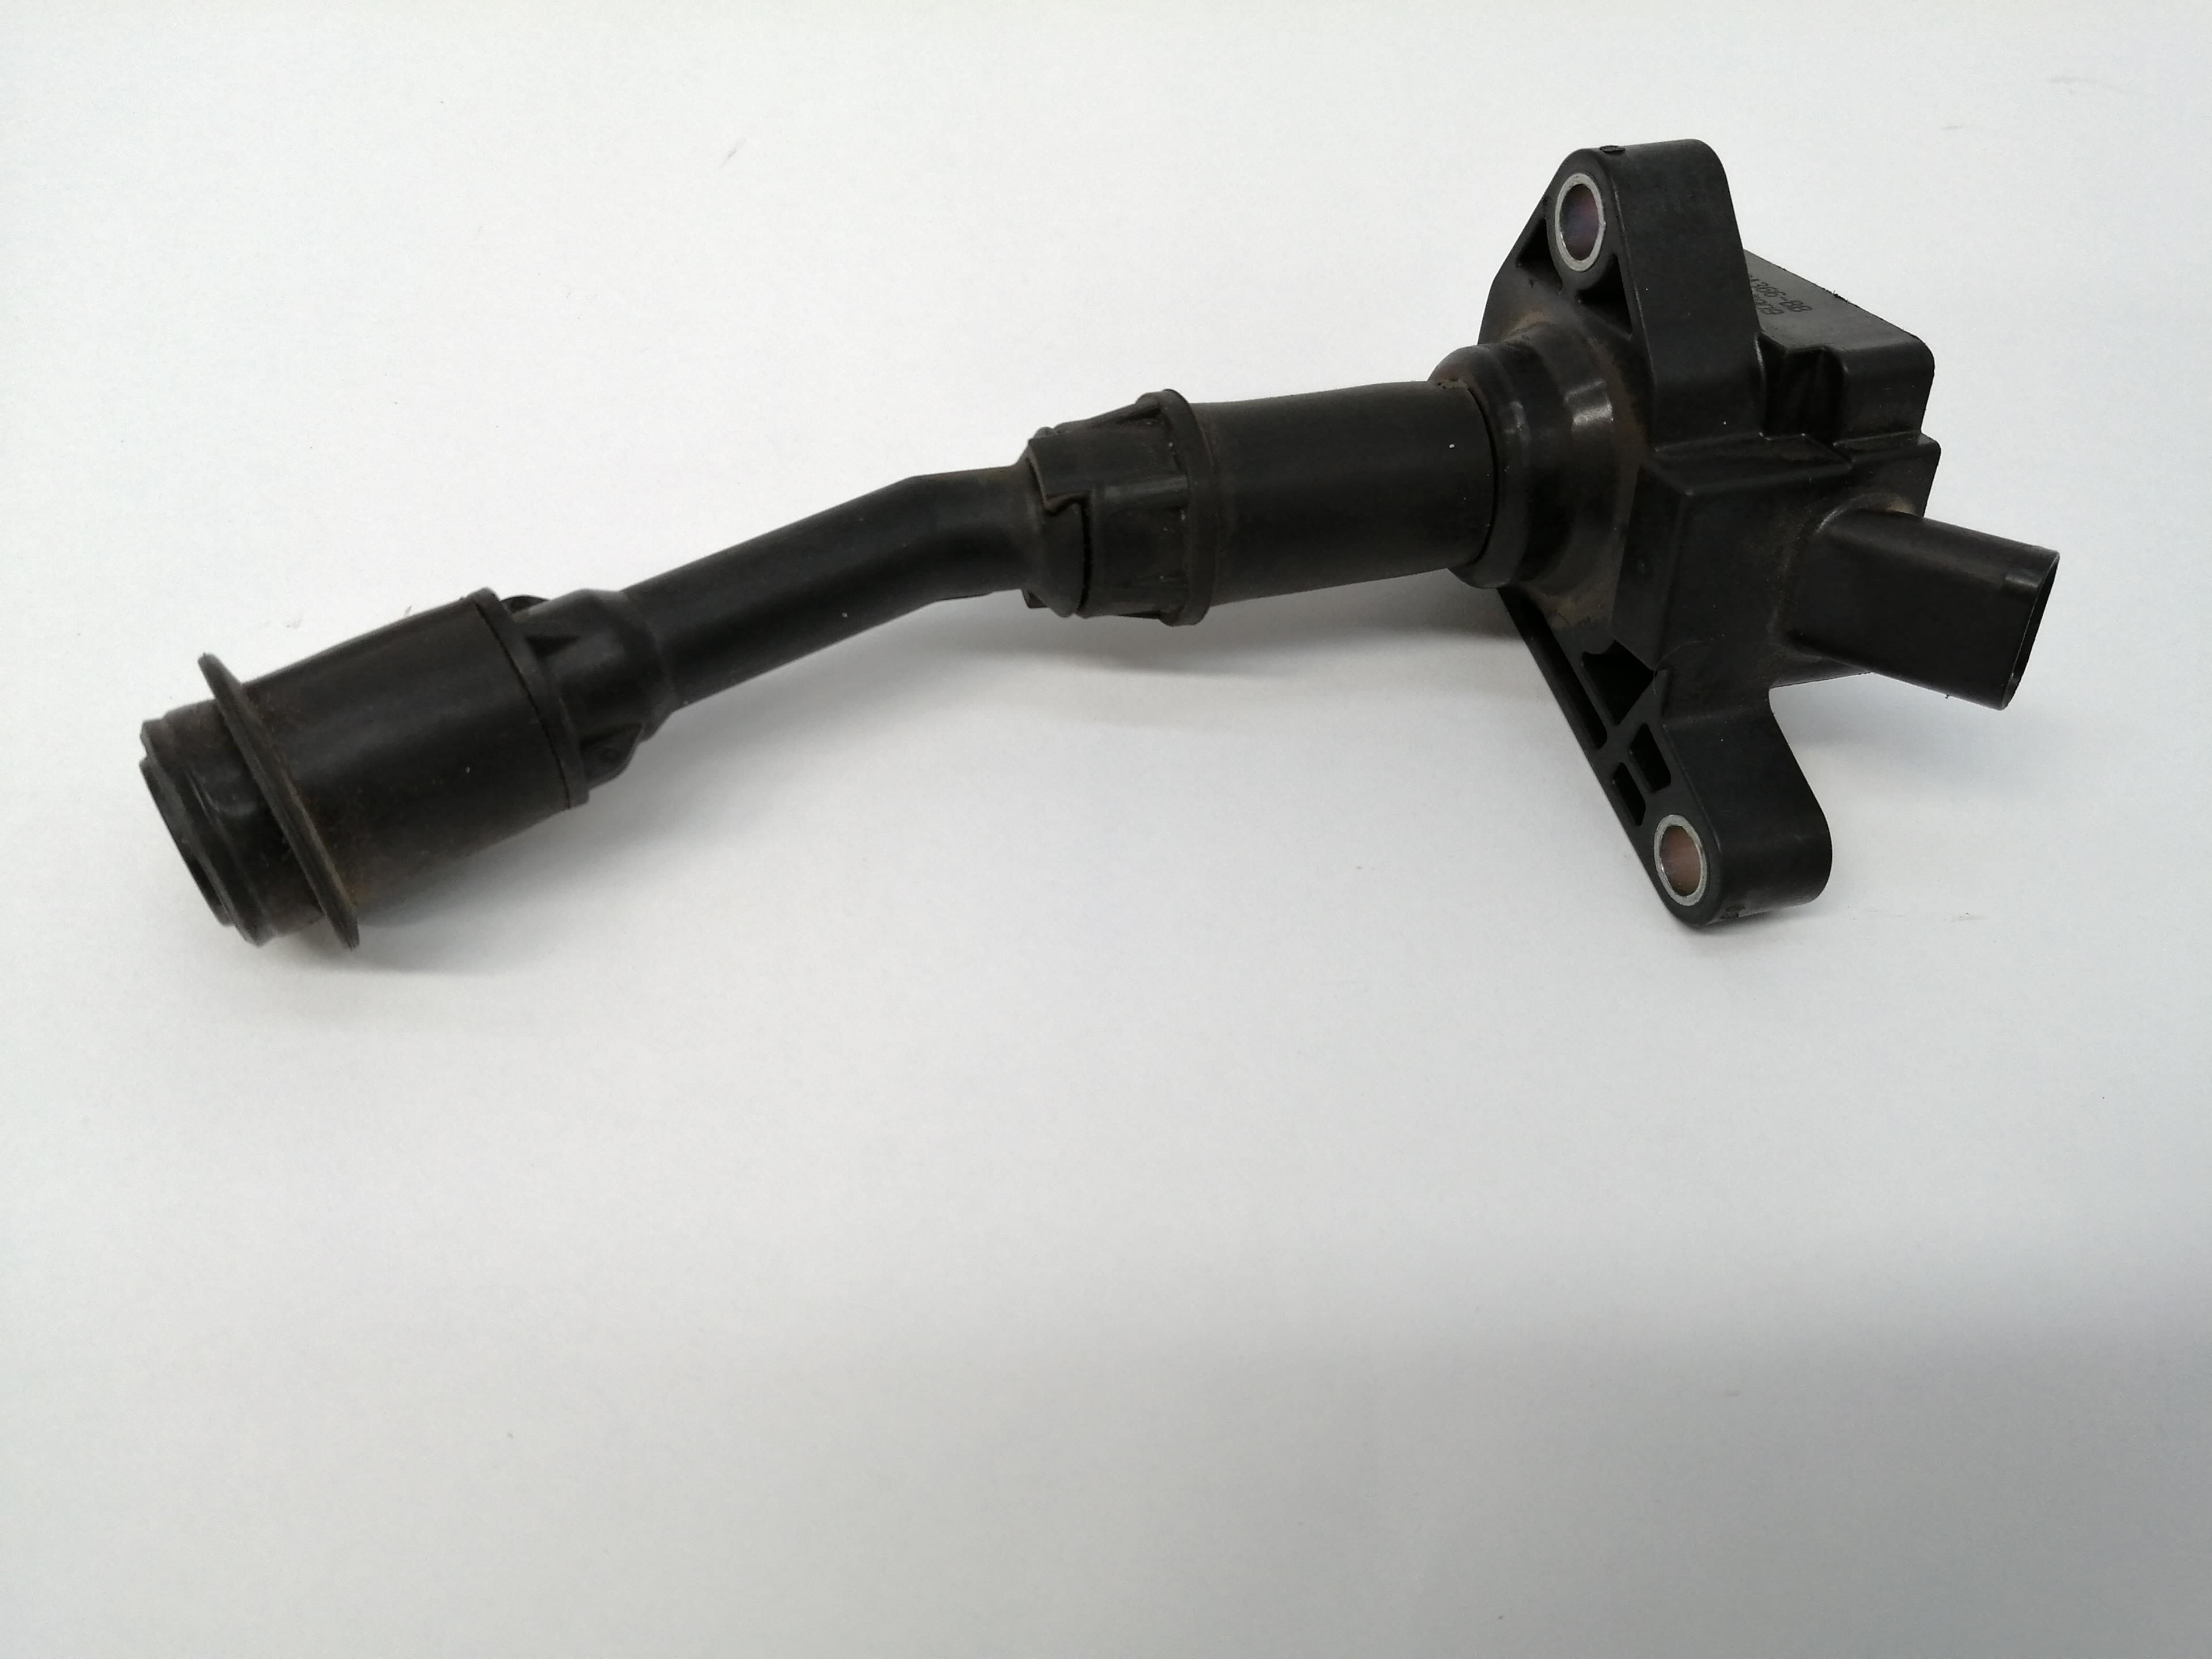 FORD Kuga 2 generation (2013-2020) High Voltage Ignition Coil DS7G12A366BB, D5E1G 23453478